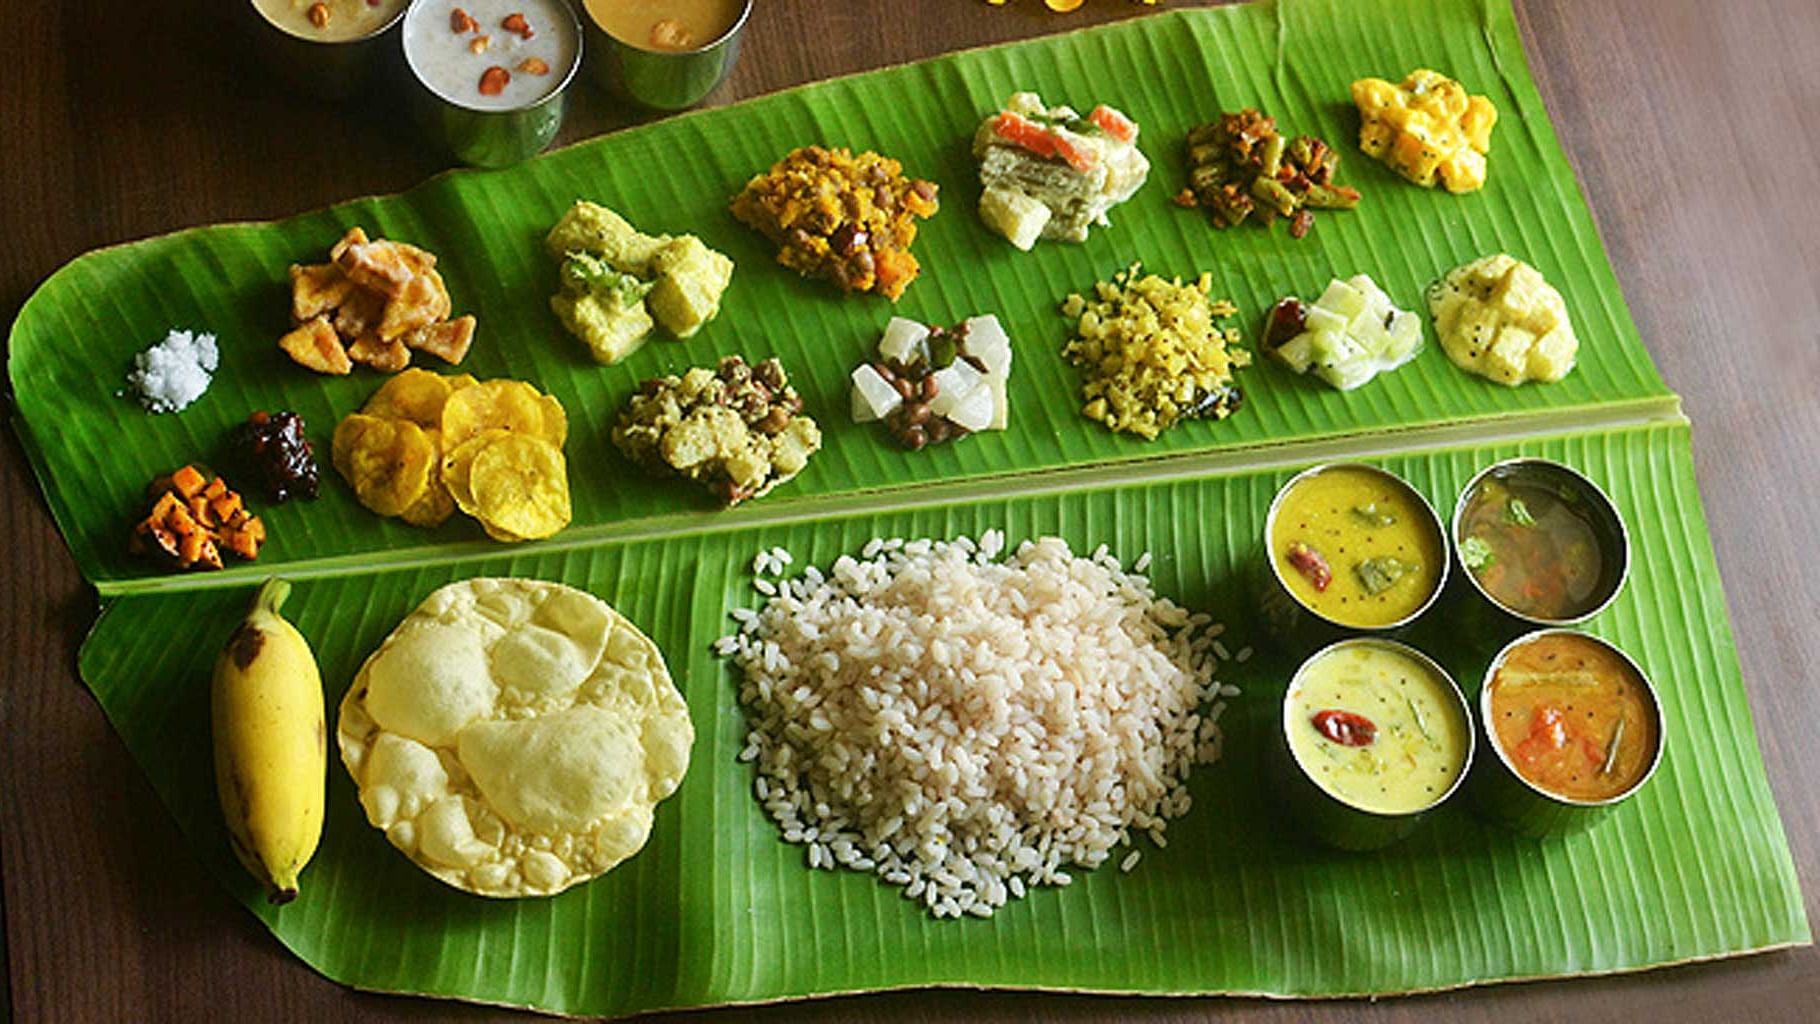 <div class="paragraphs"><p>The traditional Onam sadya consists of over 30 dishes ranging from curries, vegetables, pickles and sweets. </p></div>